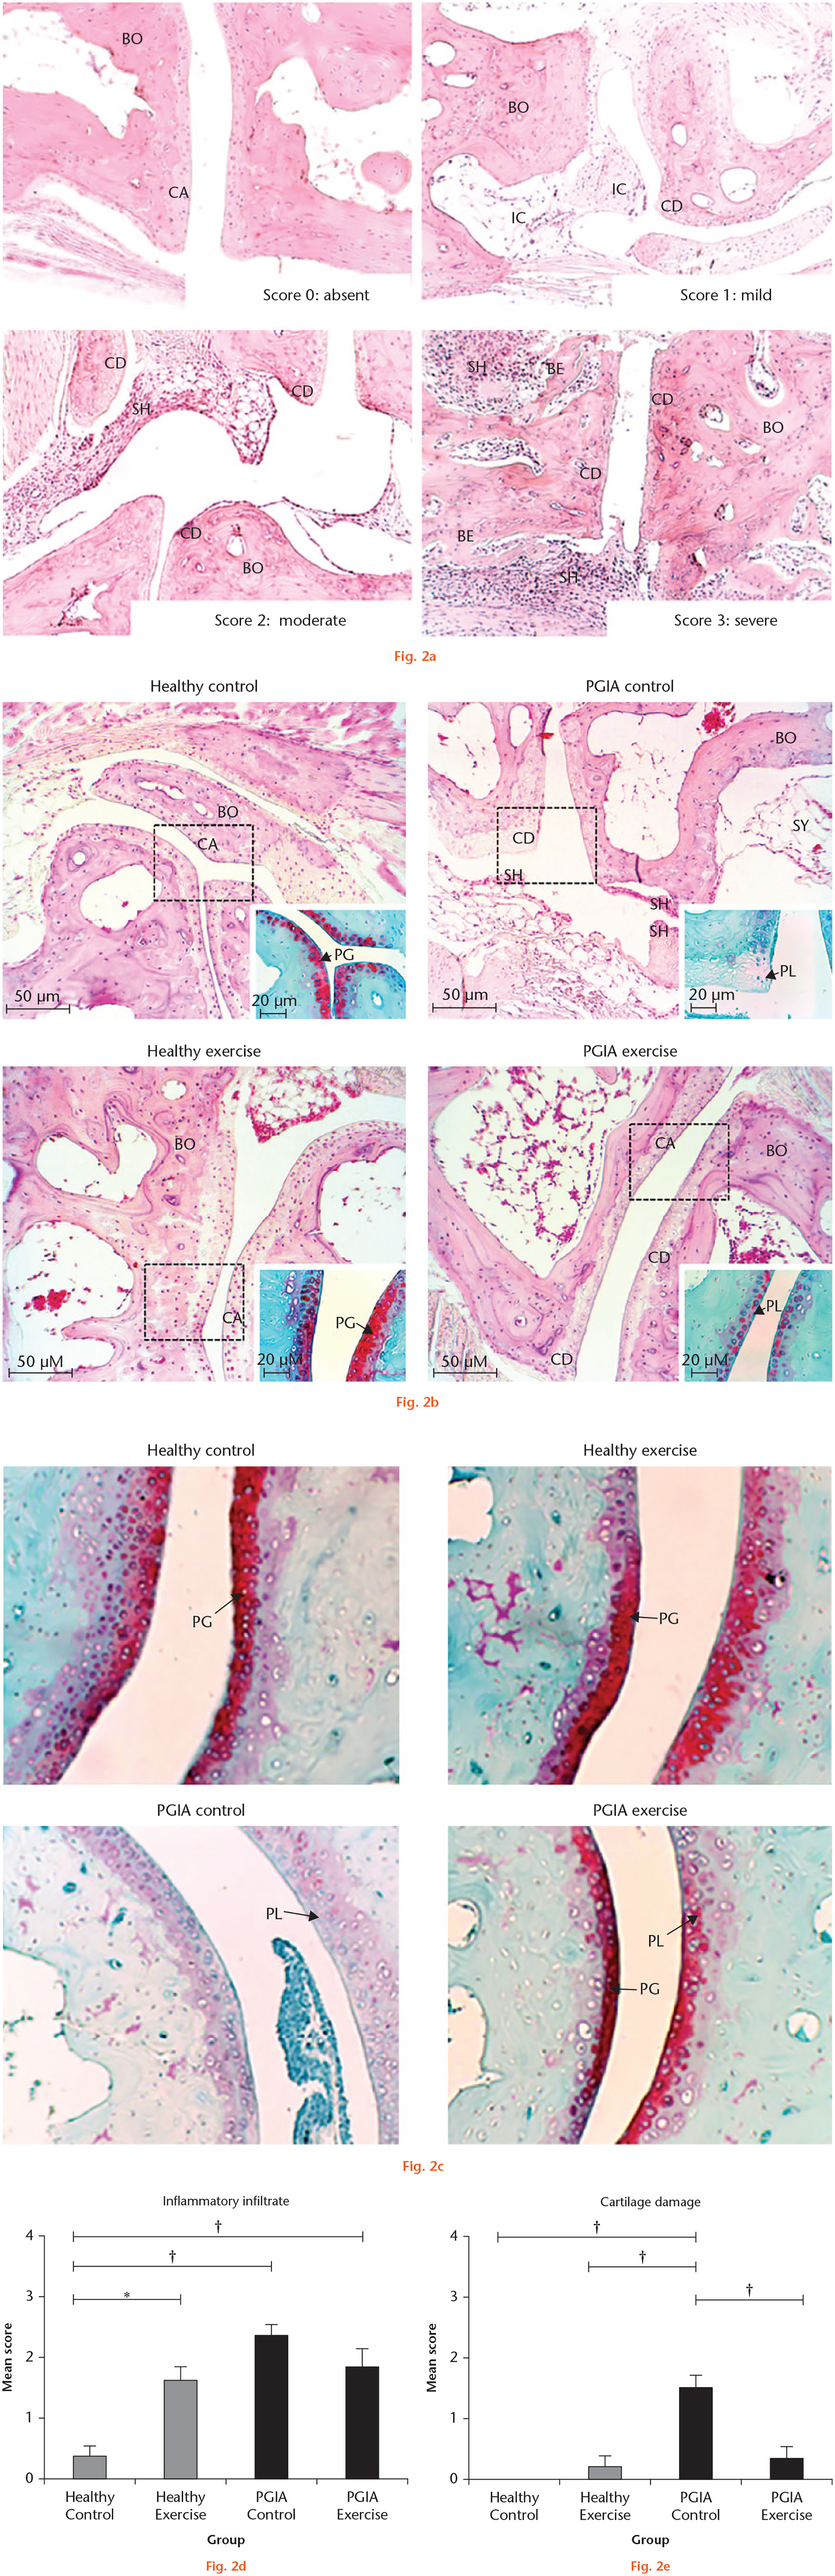 Fig. 2 
            Effects of exercise on tarsal bone histological parameters in proteoglycan-induced arthritis (PGIA) and healthy mice. a) Representative images of the inflammatory infiltrate and cartilage damage scores in the tarsal joints of PGIA mice. The 0 (normal) score was established in the control group (healthy control), where the bone, cartilage, and synovium did not show alterations. The arthritis scores 1 (mild), 2 (moderate) and 3 (severe) were based on the inflammatory changes (presence of inflammatory cells and synovial hyperplasia) and structural remodelling (cartilage damage and bone erosion). The images were acquired with a 10× amplification. b) Representative images of histological findings in the tarsal joints of the four study groups at the end of the exercise intervention using haematoxylin and eosin (H&E) and Safranin-O/Fast green staining to unveil the cartilage proteoglycan. The proteoglycan loss (PL) allowed the assessment of cartilage damage. The rectangle delimits the section of the tissue stained with Safranin-O/Fast green which is shown in the lower right corner of each image. c) Representative images of cartilage damage in the four study groups using the Safranin-O/Fast green staining to unveil the proteoglycan content and its loss. d) and e) Joint involvement was scored by the semi-quantitative scale to describe inflammatory infiltrate and cartilage damage in the tarsal joints (8 mice per group). One-way analysis of variance (ANOVA) with post hoc Tukey’s test was used to compare histological measurements between groups. *p < 0.050. †p < 0.010. BE, bone erosion; BO, bone; CA, cartilage; CD, cartilage damage; IC, inflammatory cells; PG, proteoglycan; SH, synovial hyperplasia; SY, synovium.
          